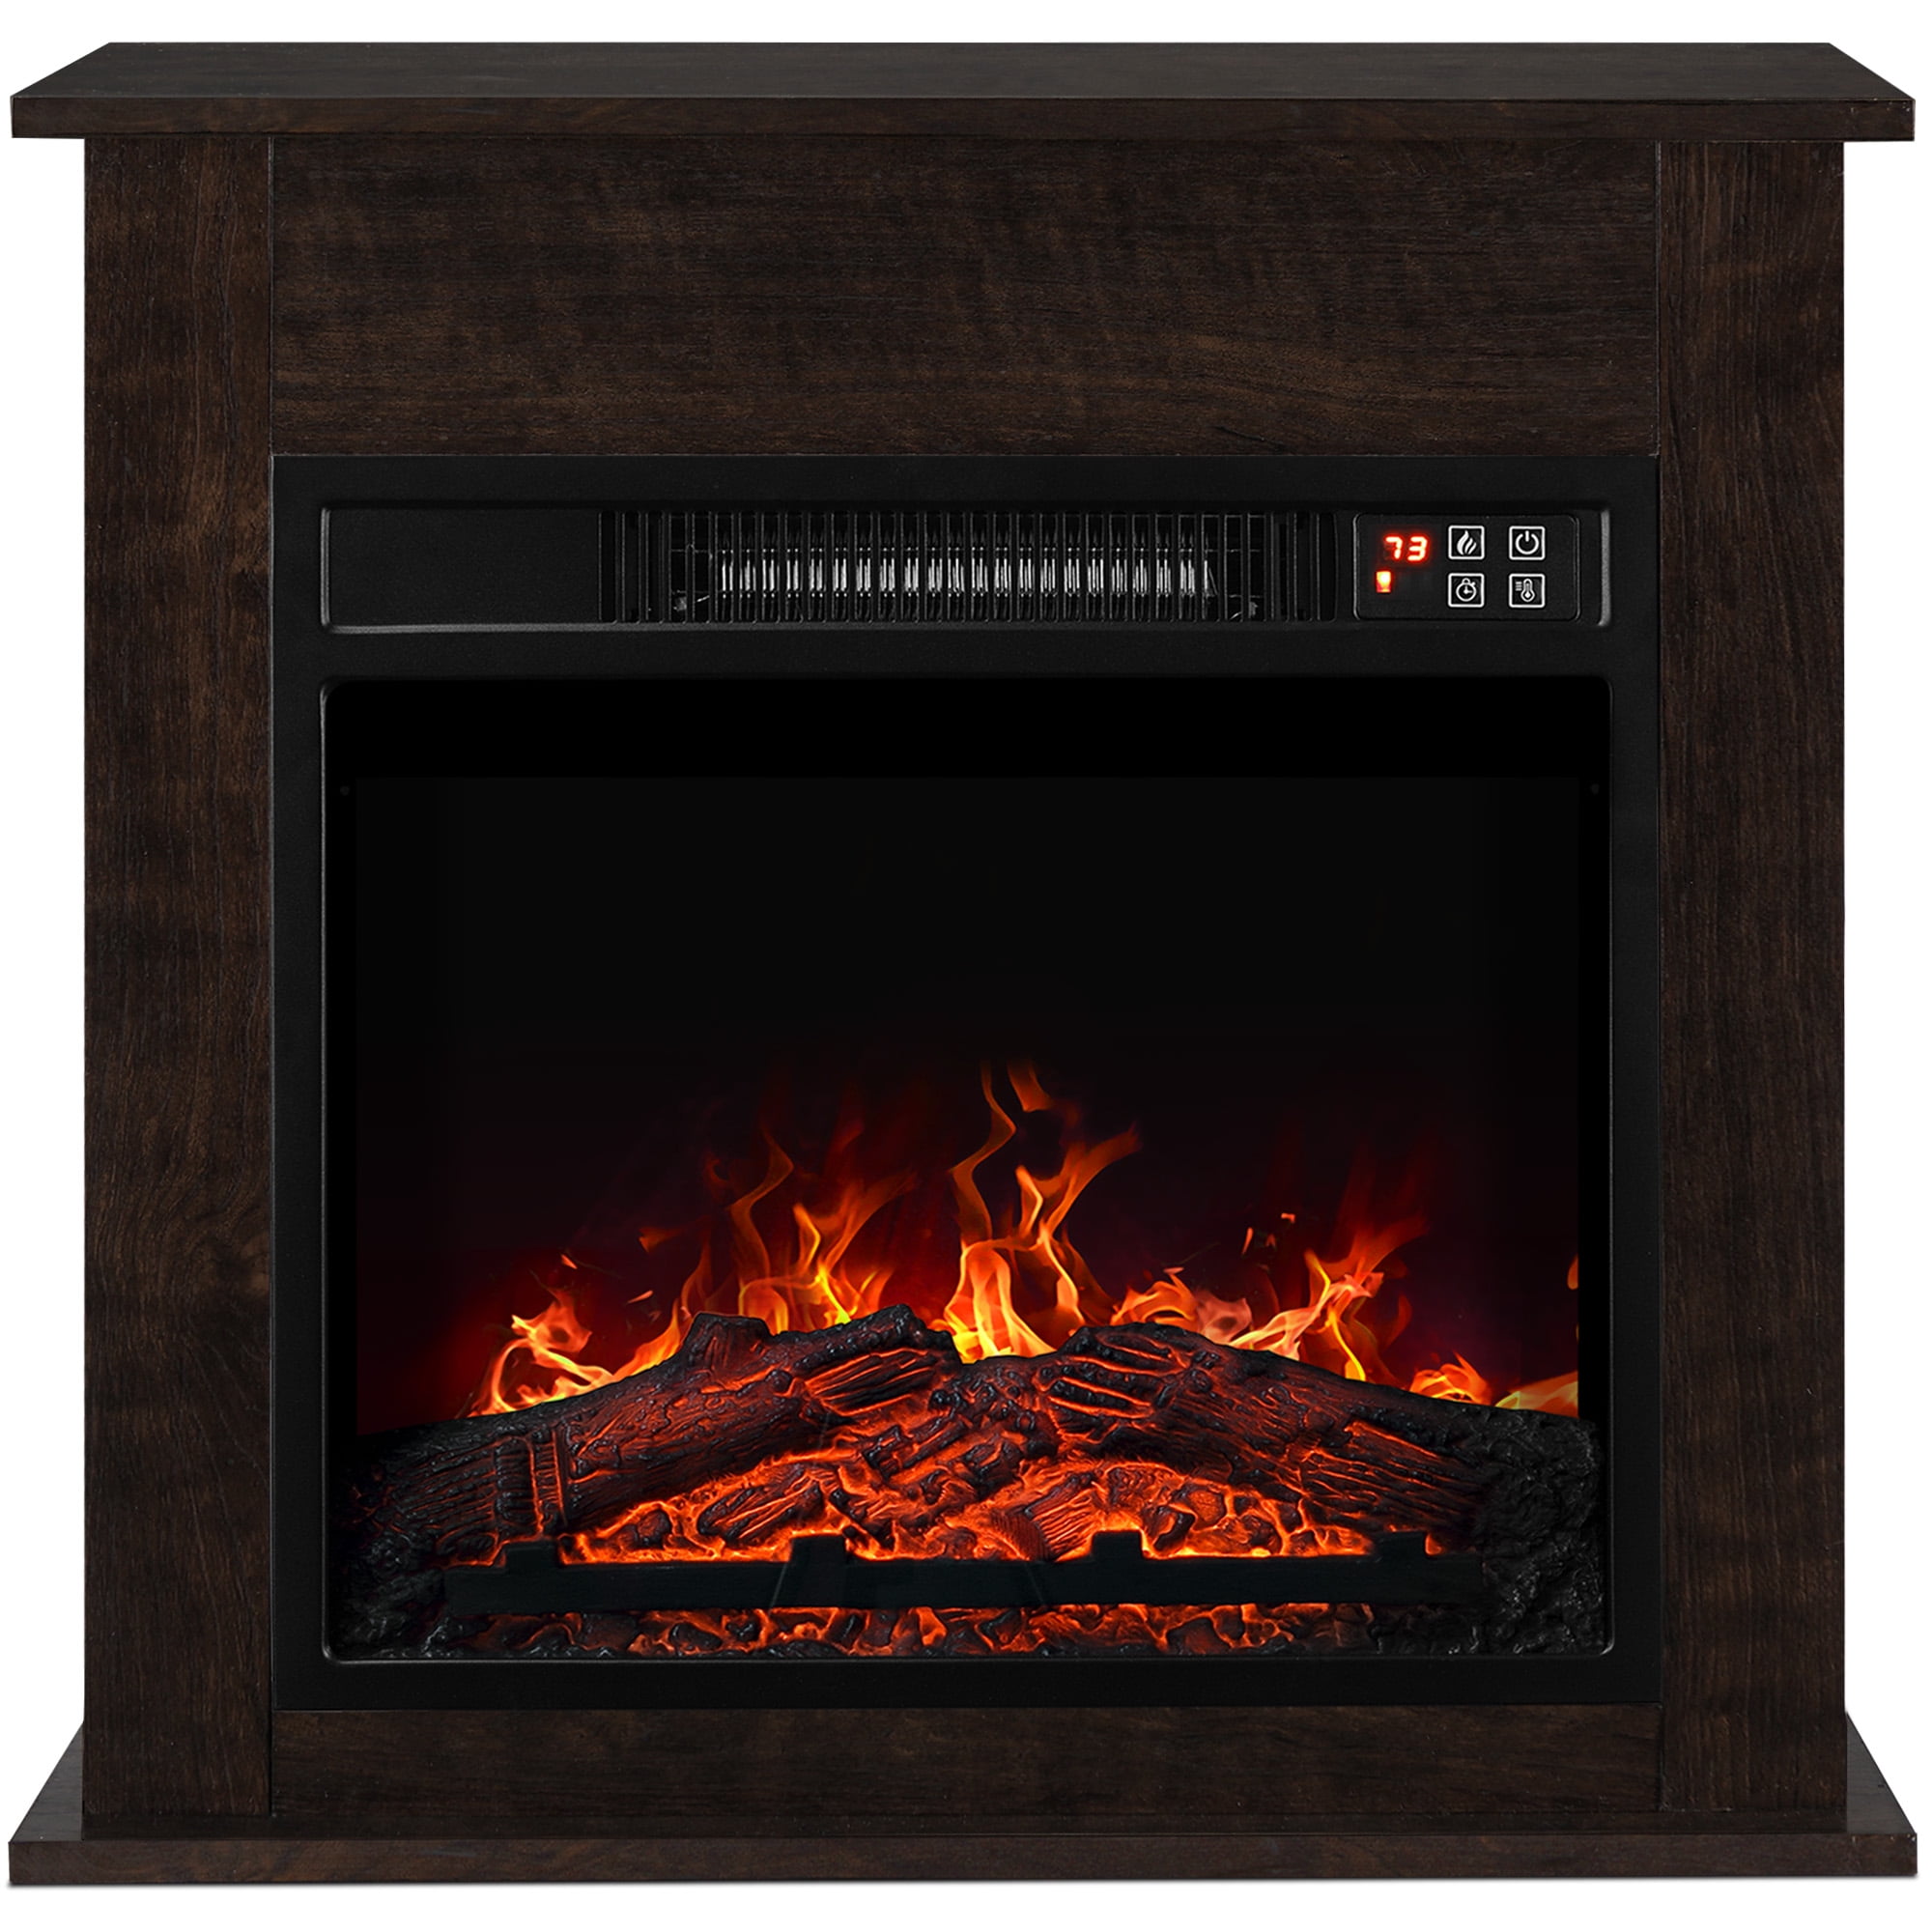 Black BELLEZE 18 Embedded Electric Fireplace Insert Remote Heater Glass View Adjustable Log Flame 1400W